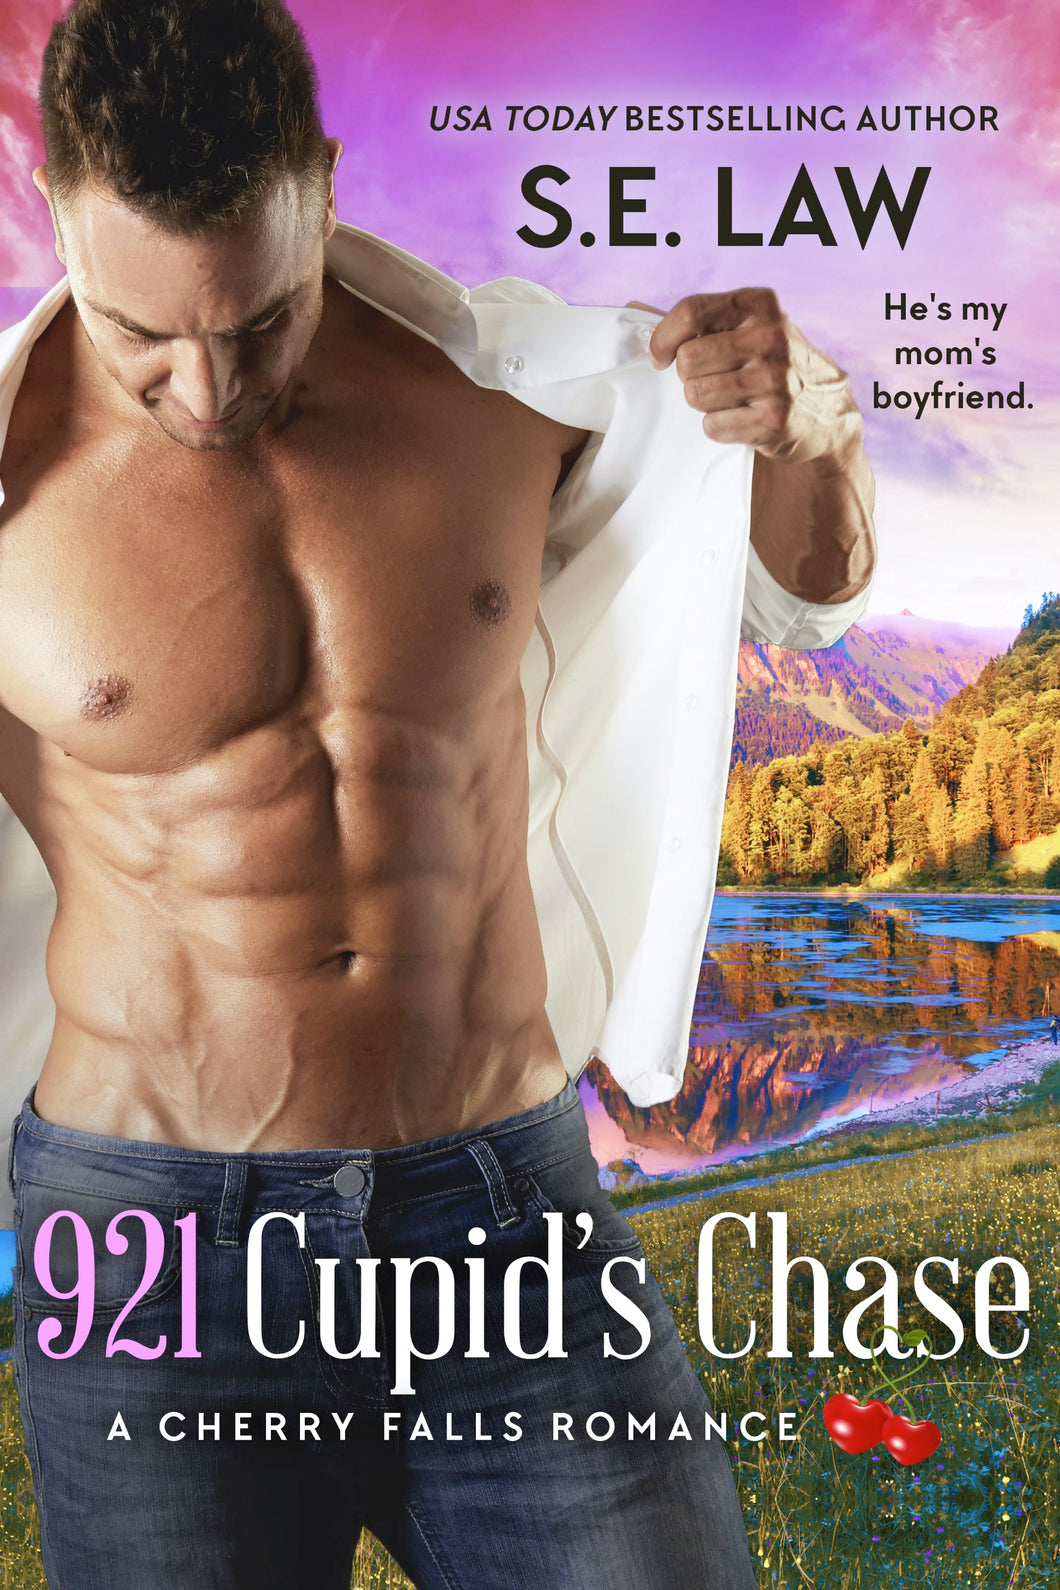 921 Cupid's Chase